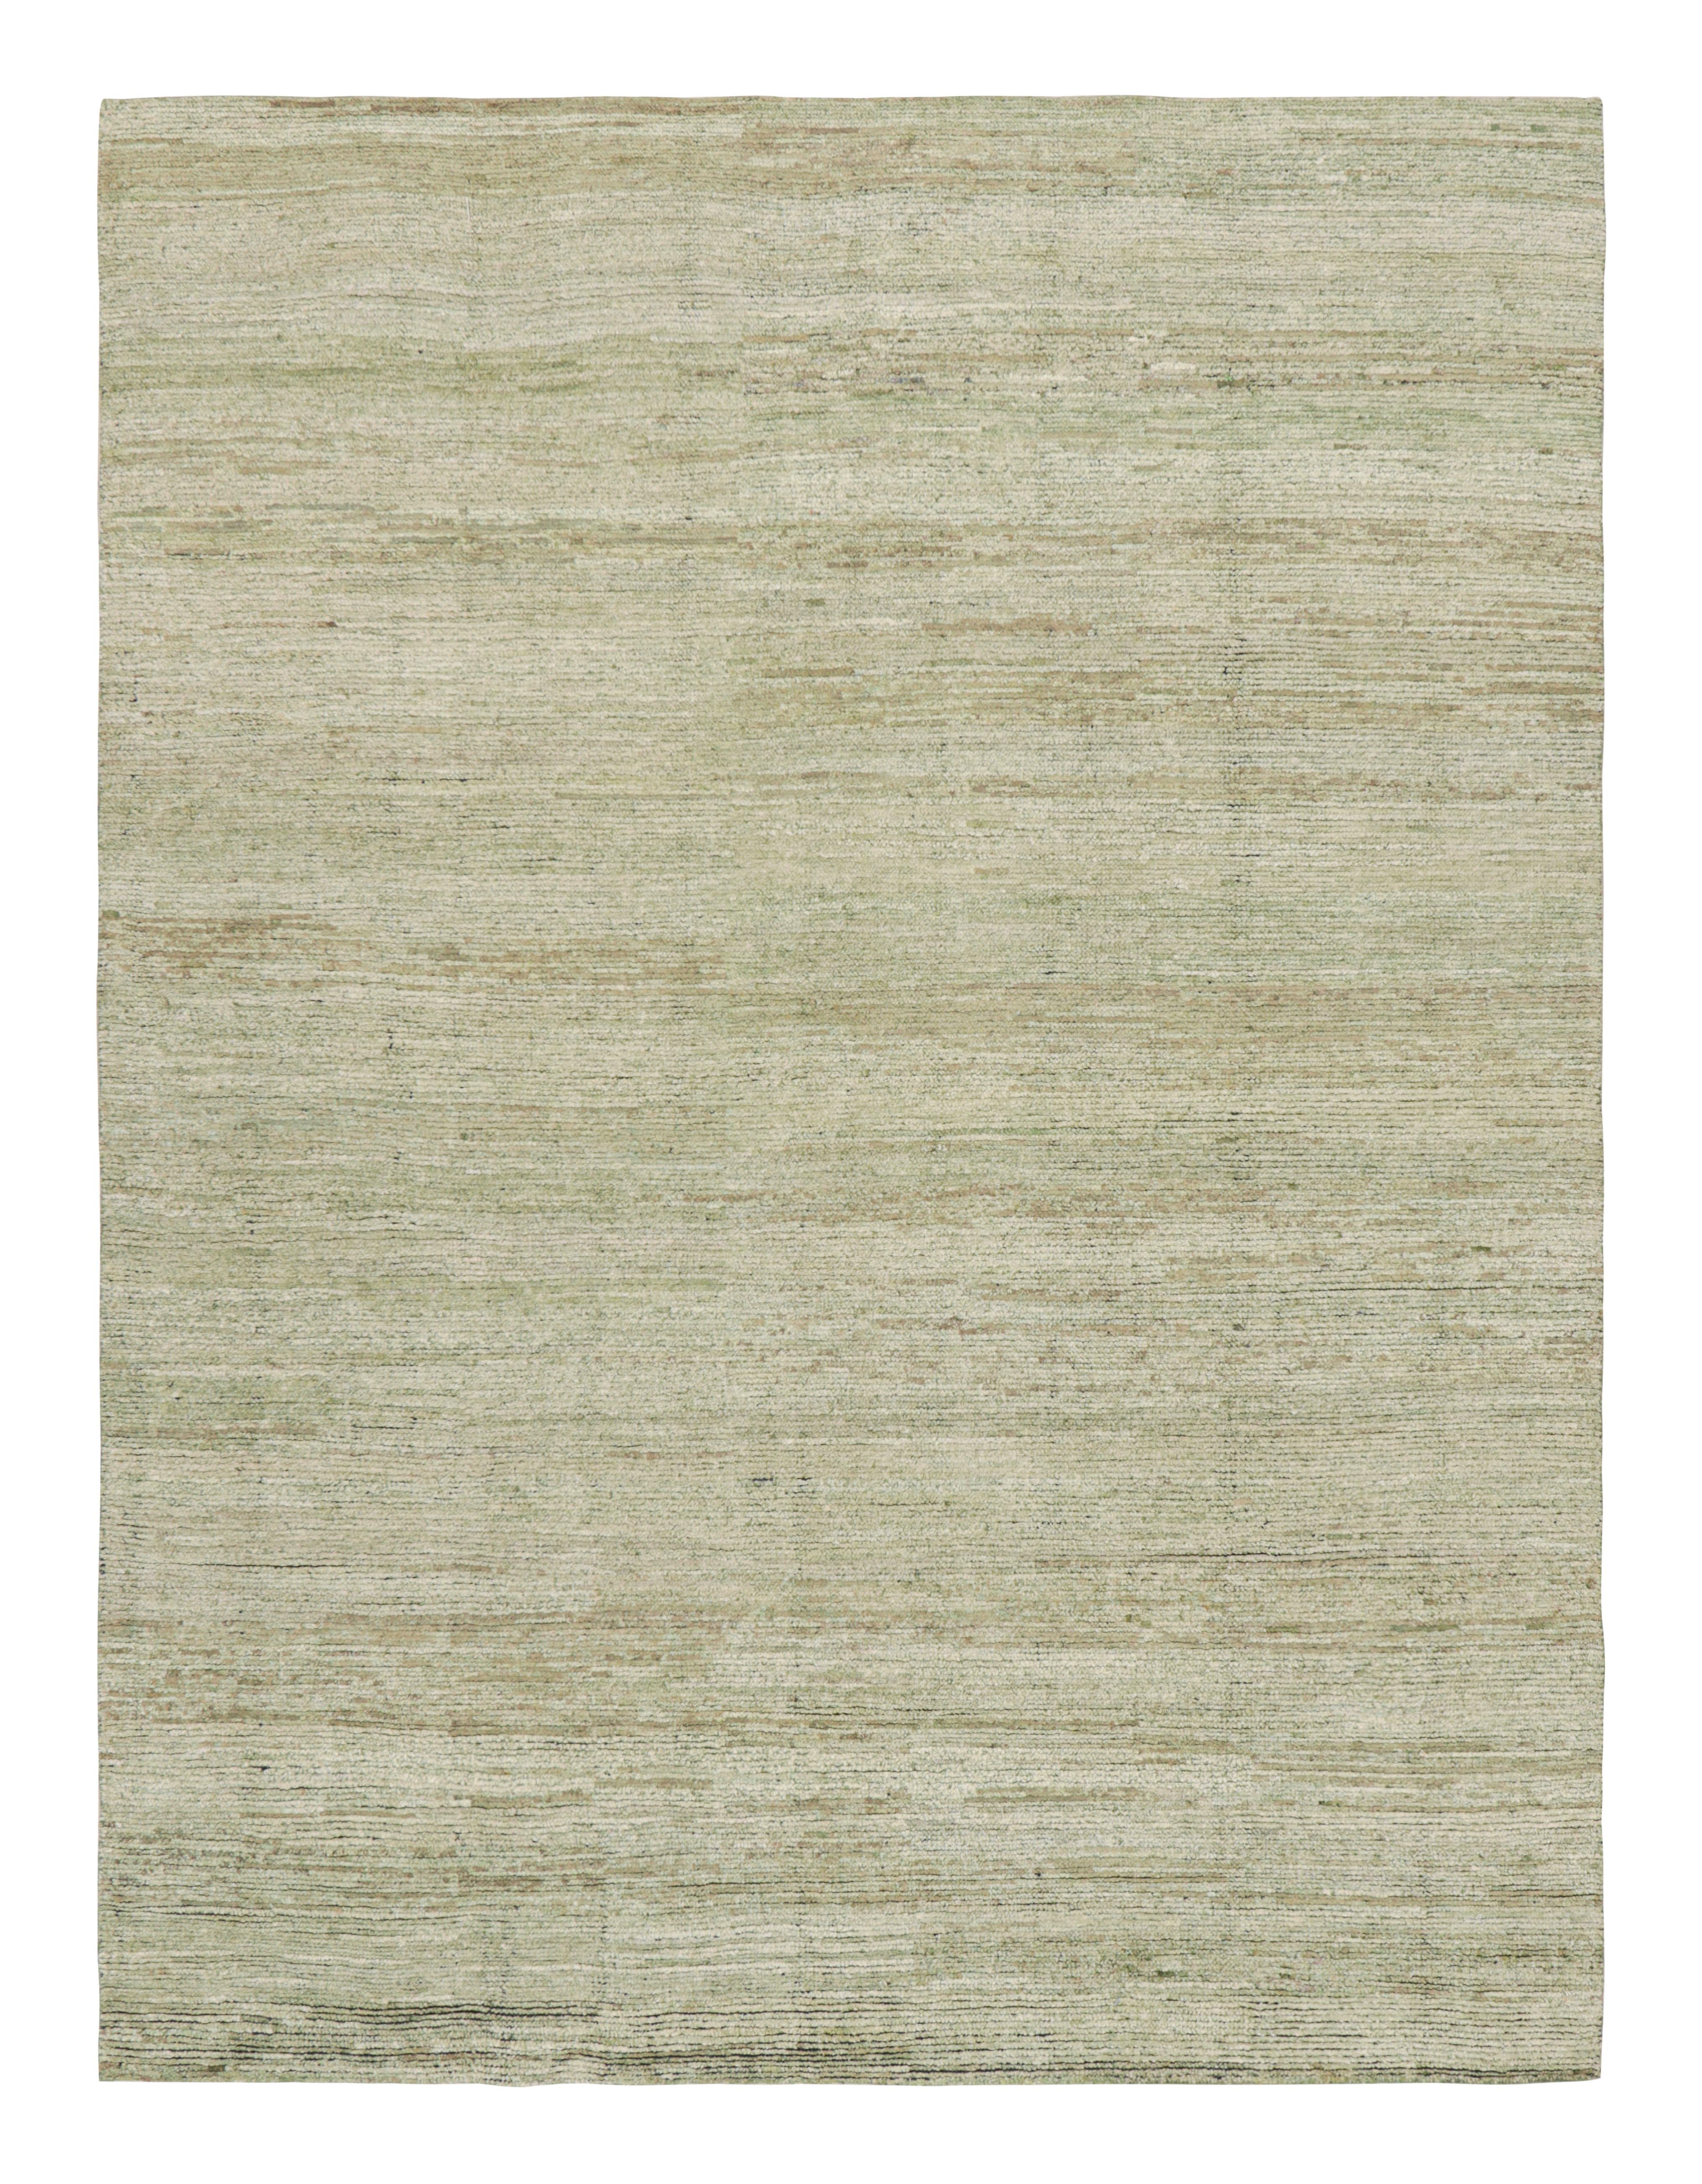 Hand-knotted in wool and silk, this 8x10 textural rug by Rug & Kilim enjoying beige-brown and green high low stripes ad striae, is from our very special partner loom known for their lush, luxurious quality and contemporary designs. 

On the Design: